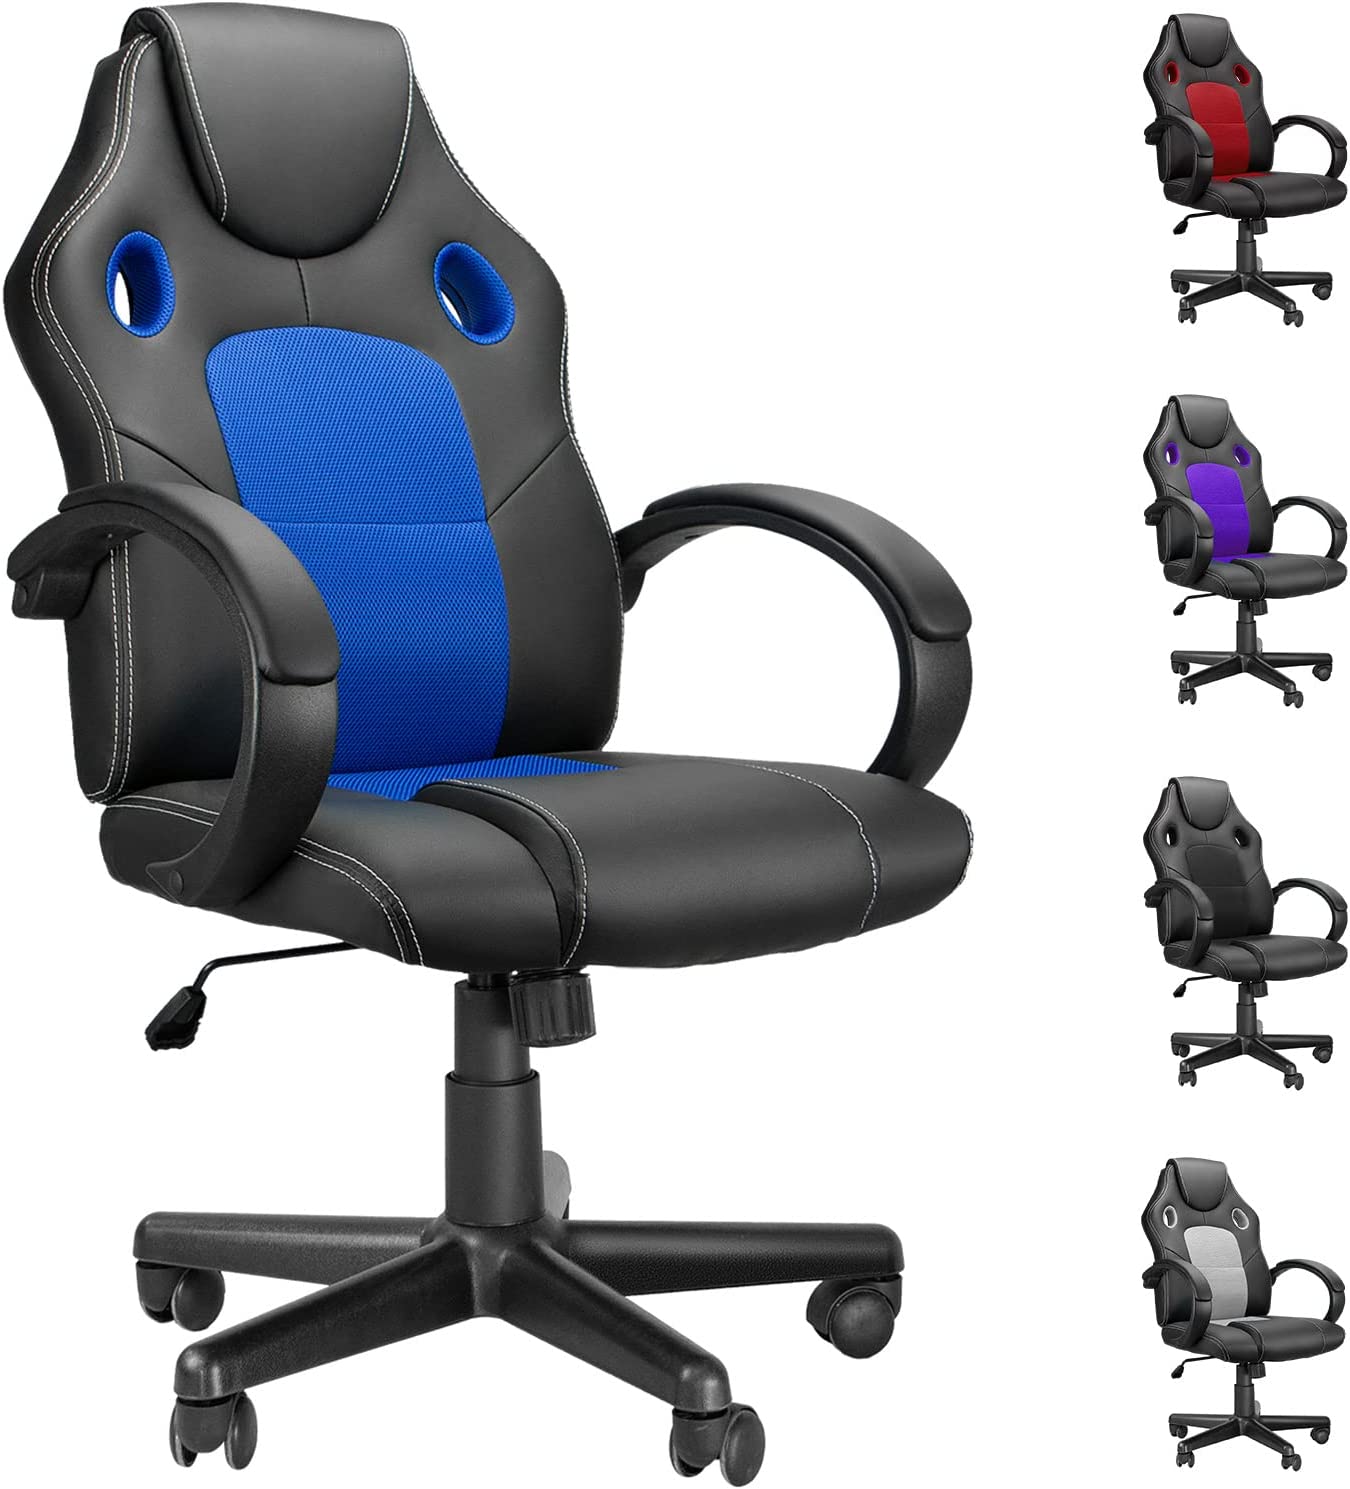 DualThunder Gaming Office Chair, Ergonomic Cheap Gaming Chair, Computer Chairs Video Game Chairs, Reclining Rolling Gaming Chairs for Adults, Teens